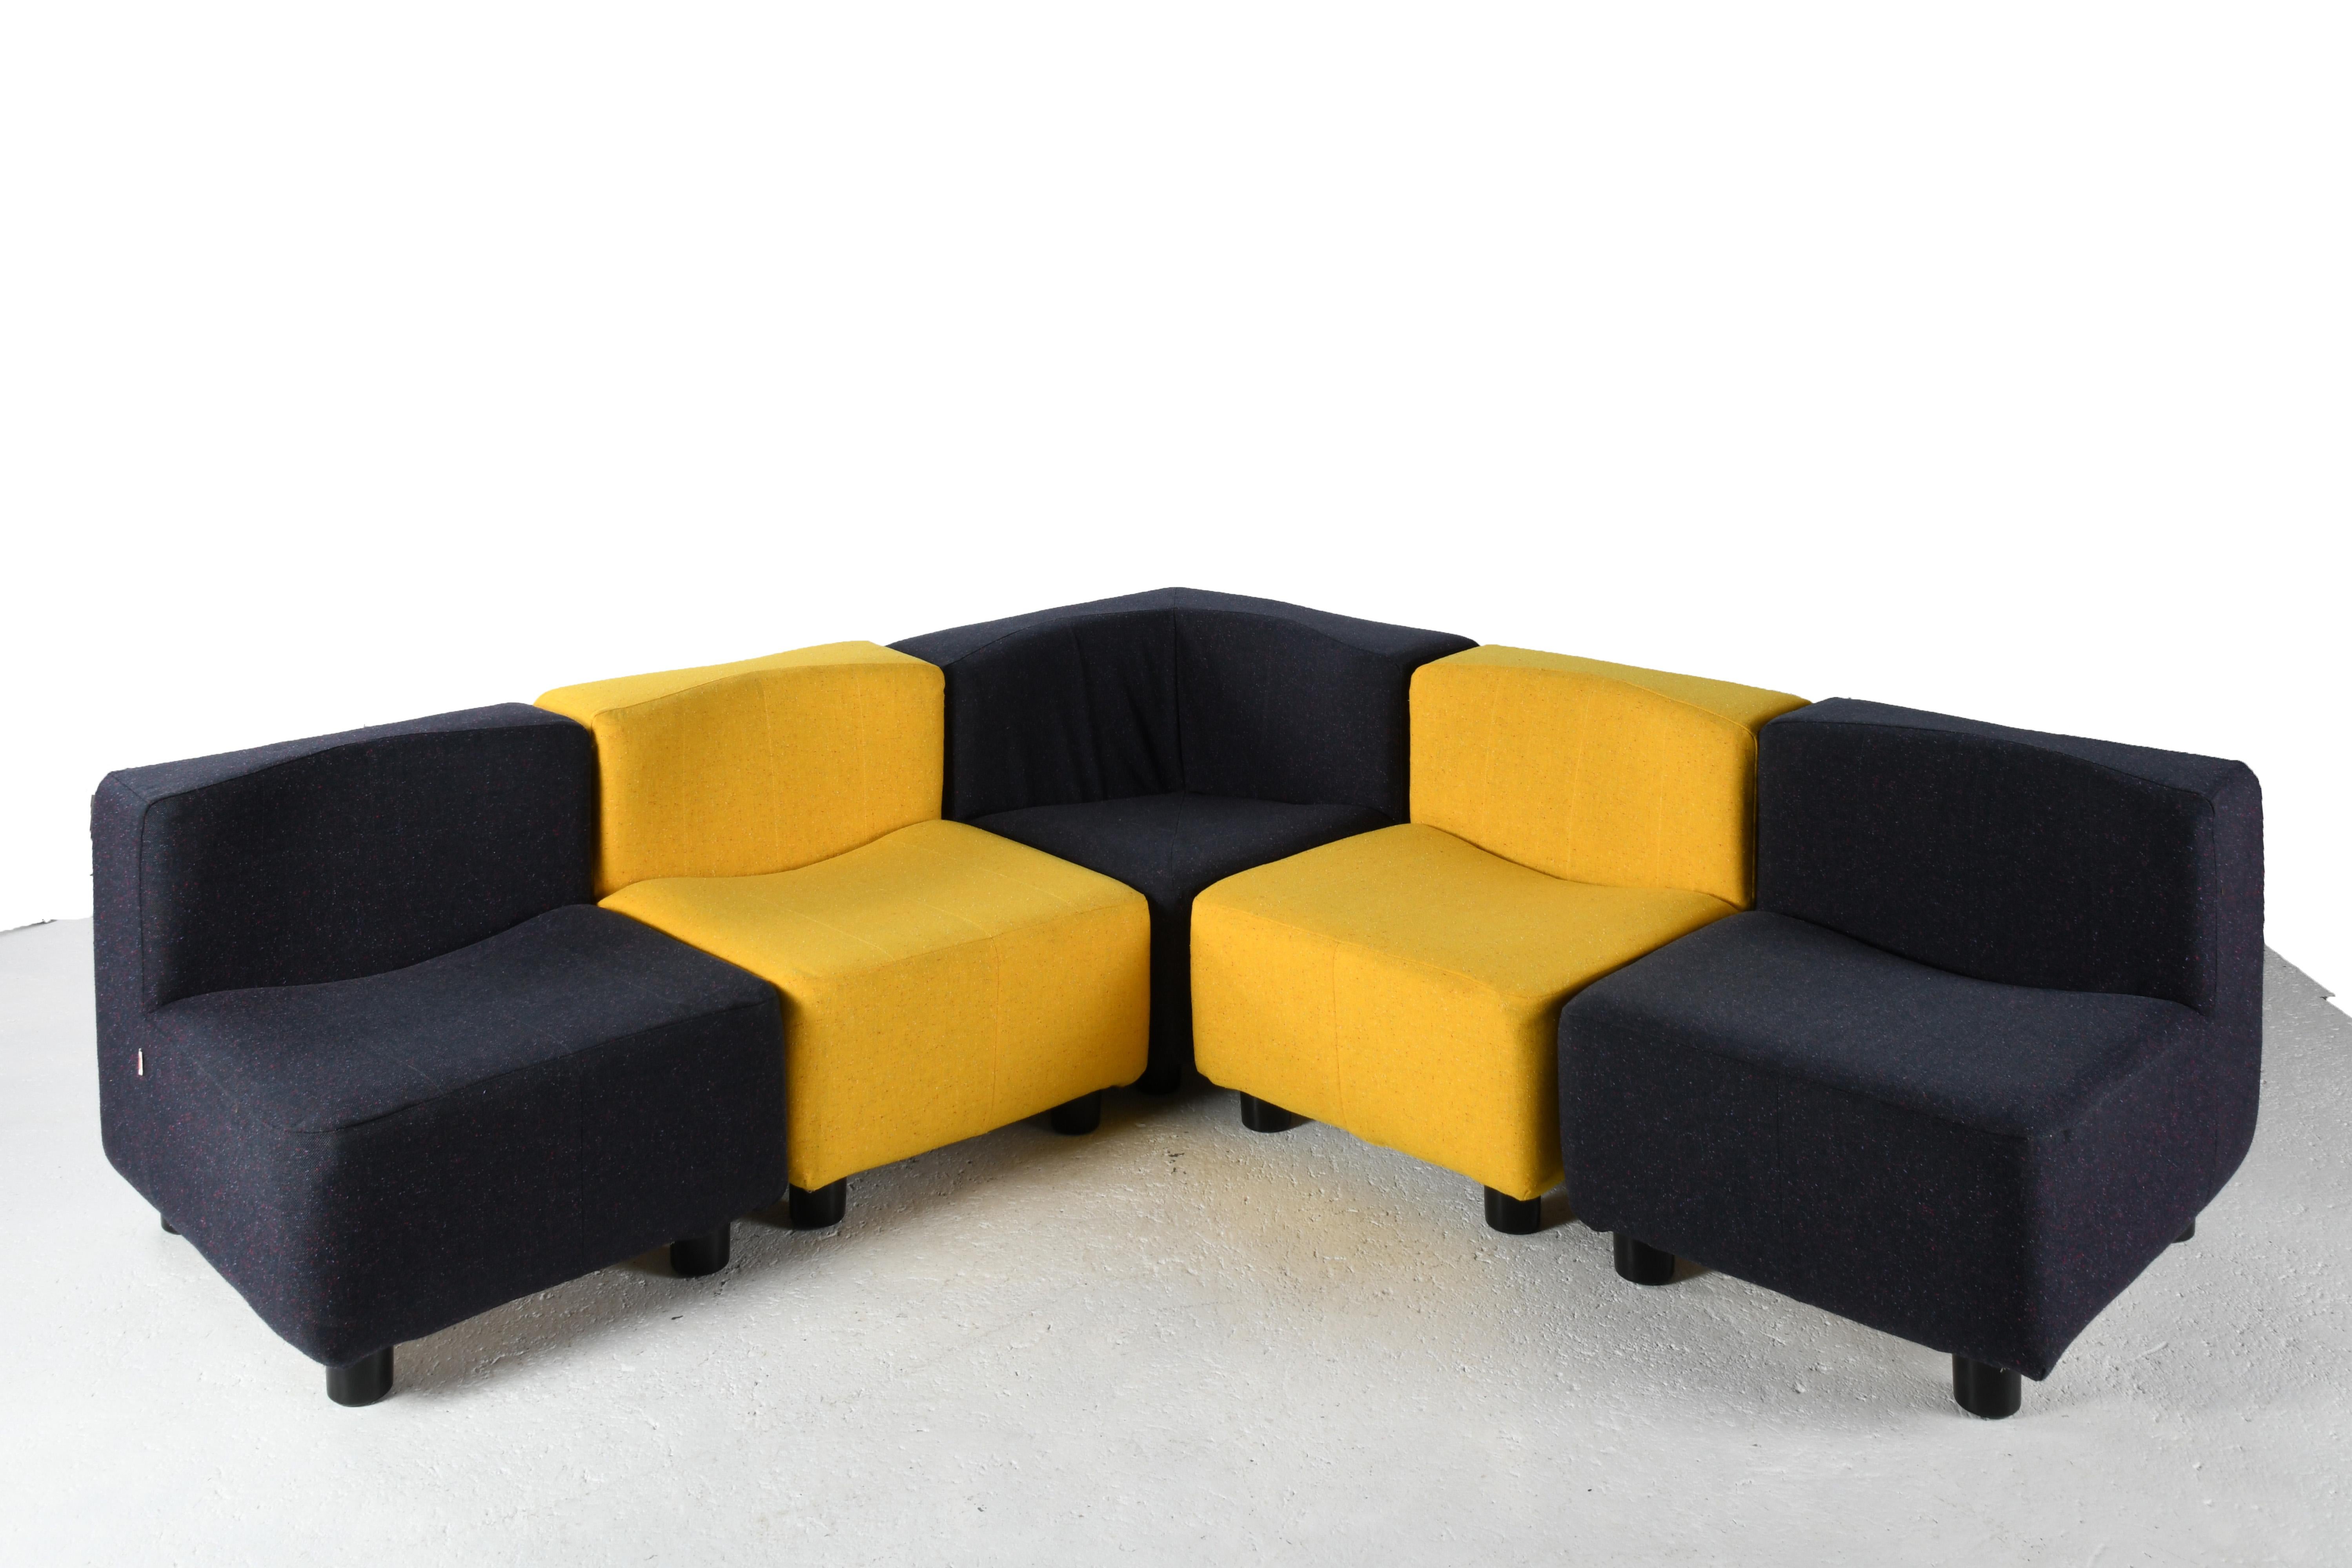 Suite of five designer armchairs in the style of Tito Agnoli and his 9000 (Novemila) model, published by Arfa. Metal frame and foam upholstered in fabric, black plastic legs. One corner seat and four straight seats in two colours, yellow and navy